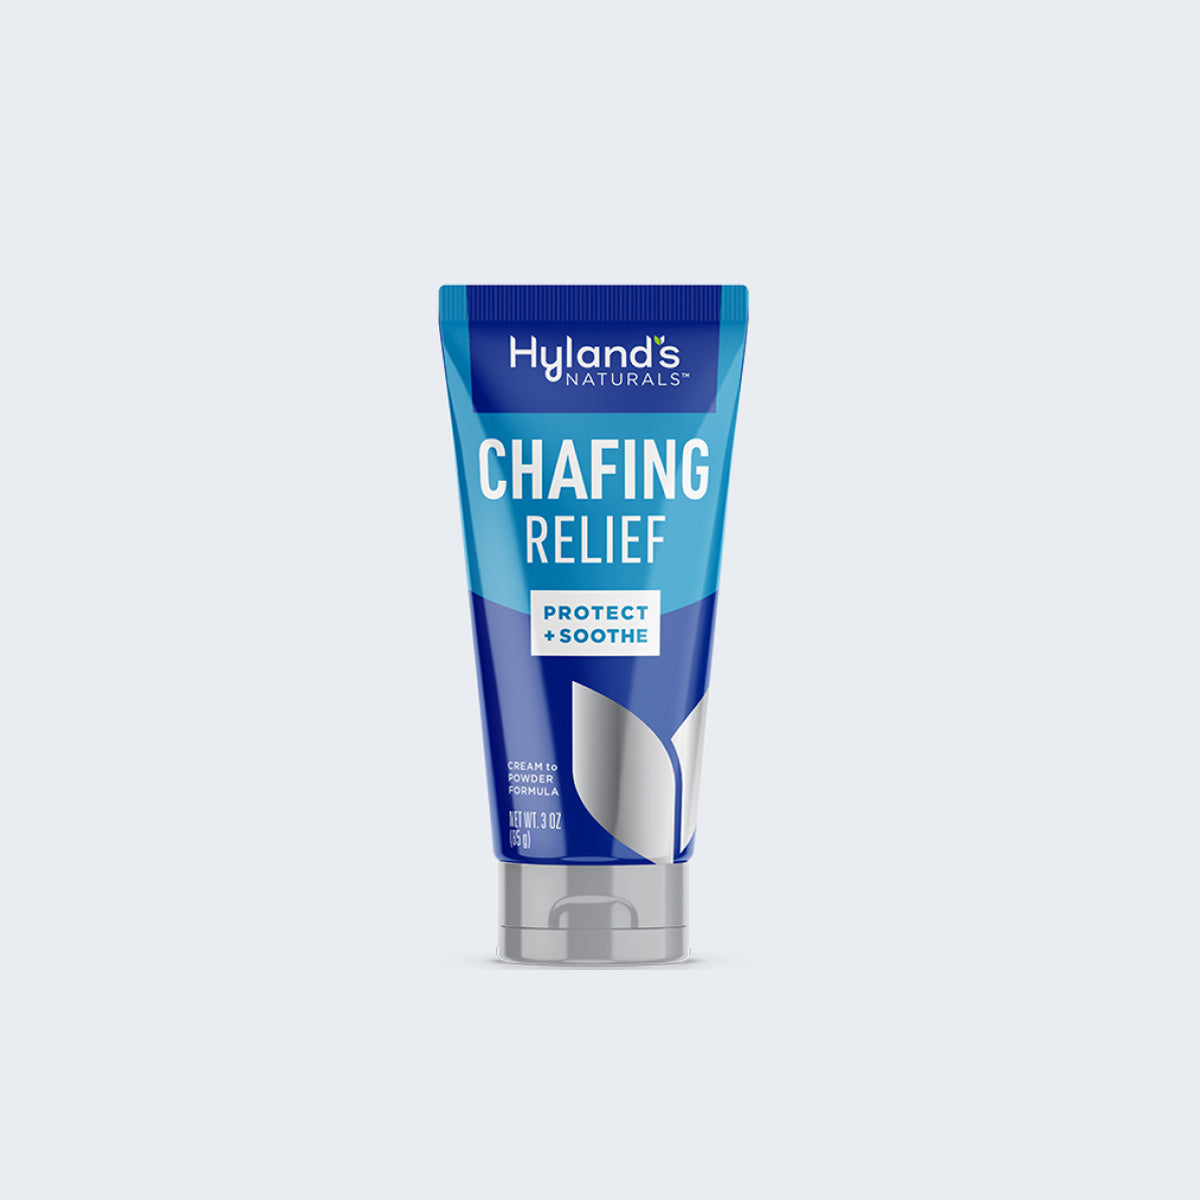 Chafing Relief – Hyland's Naturals